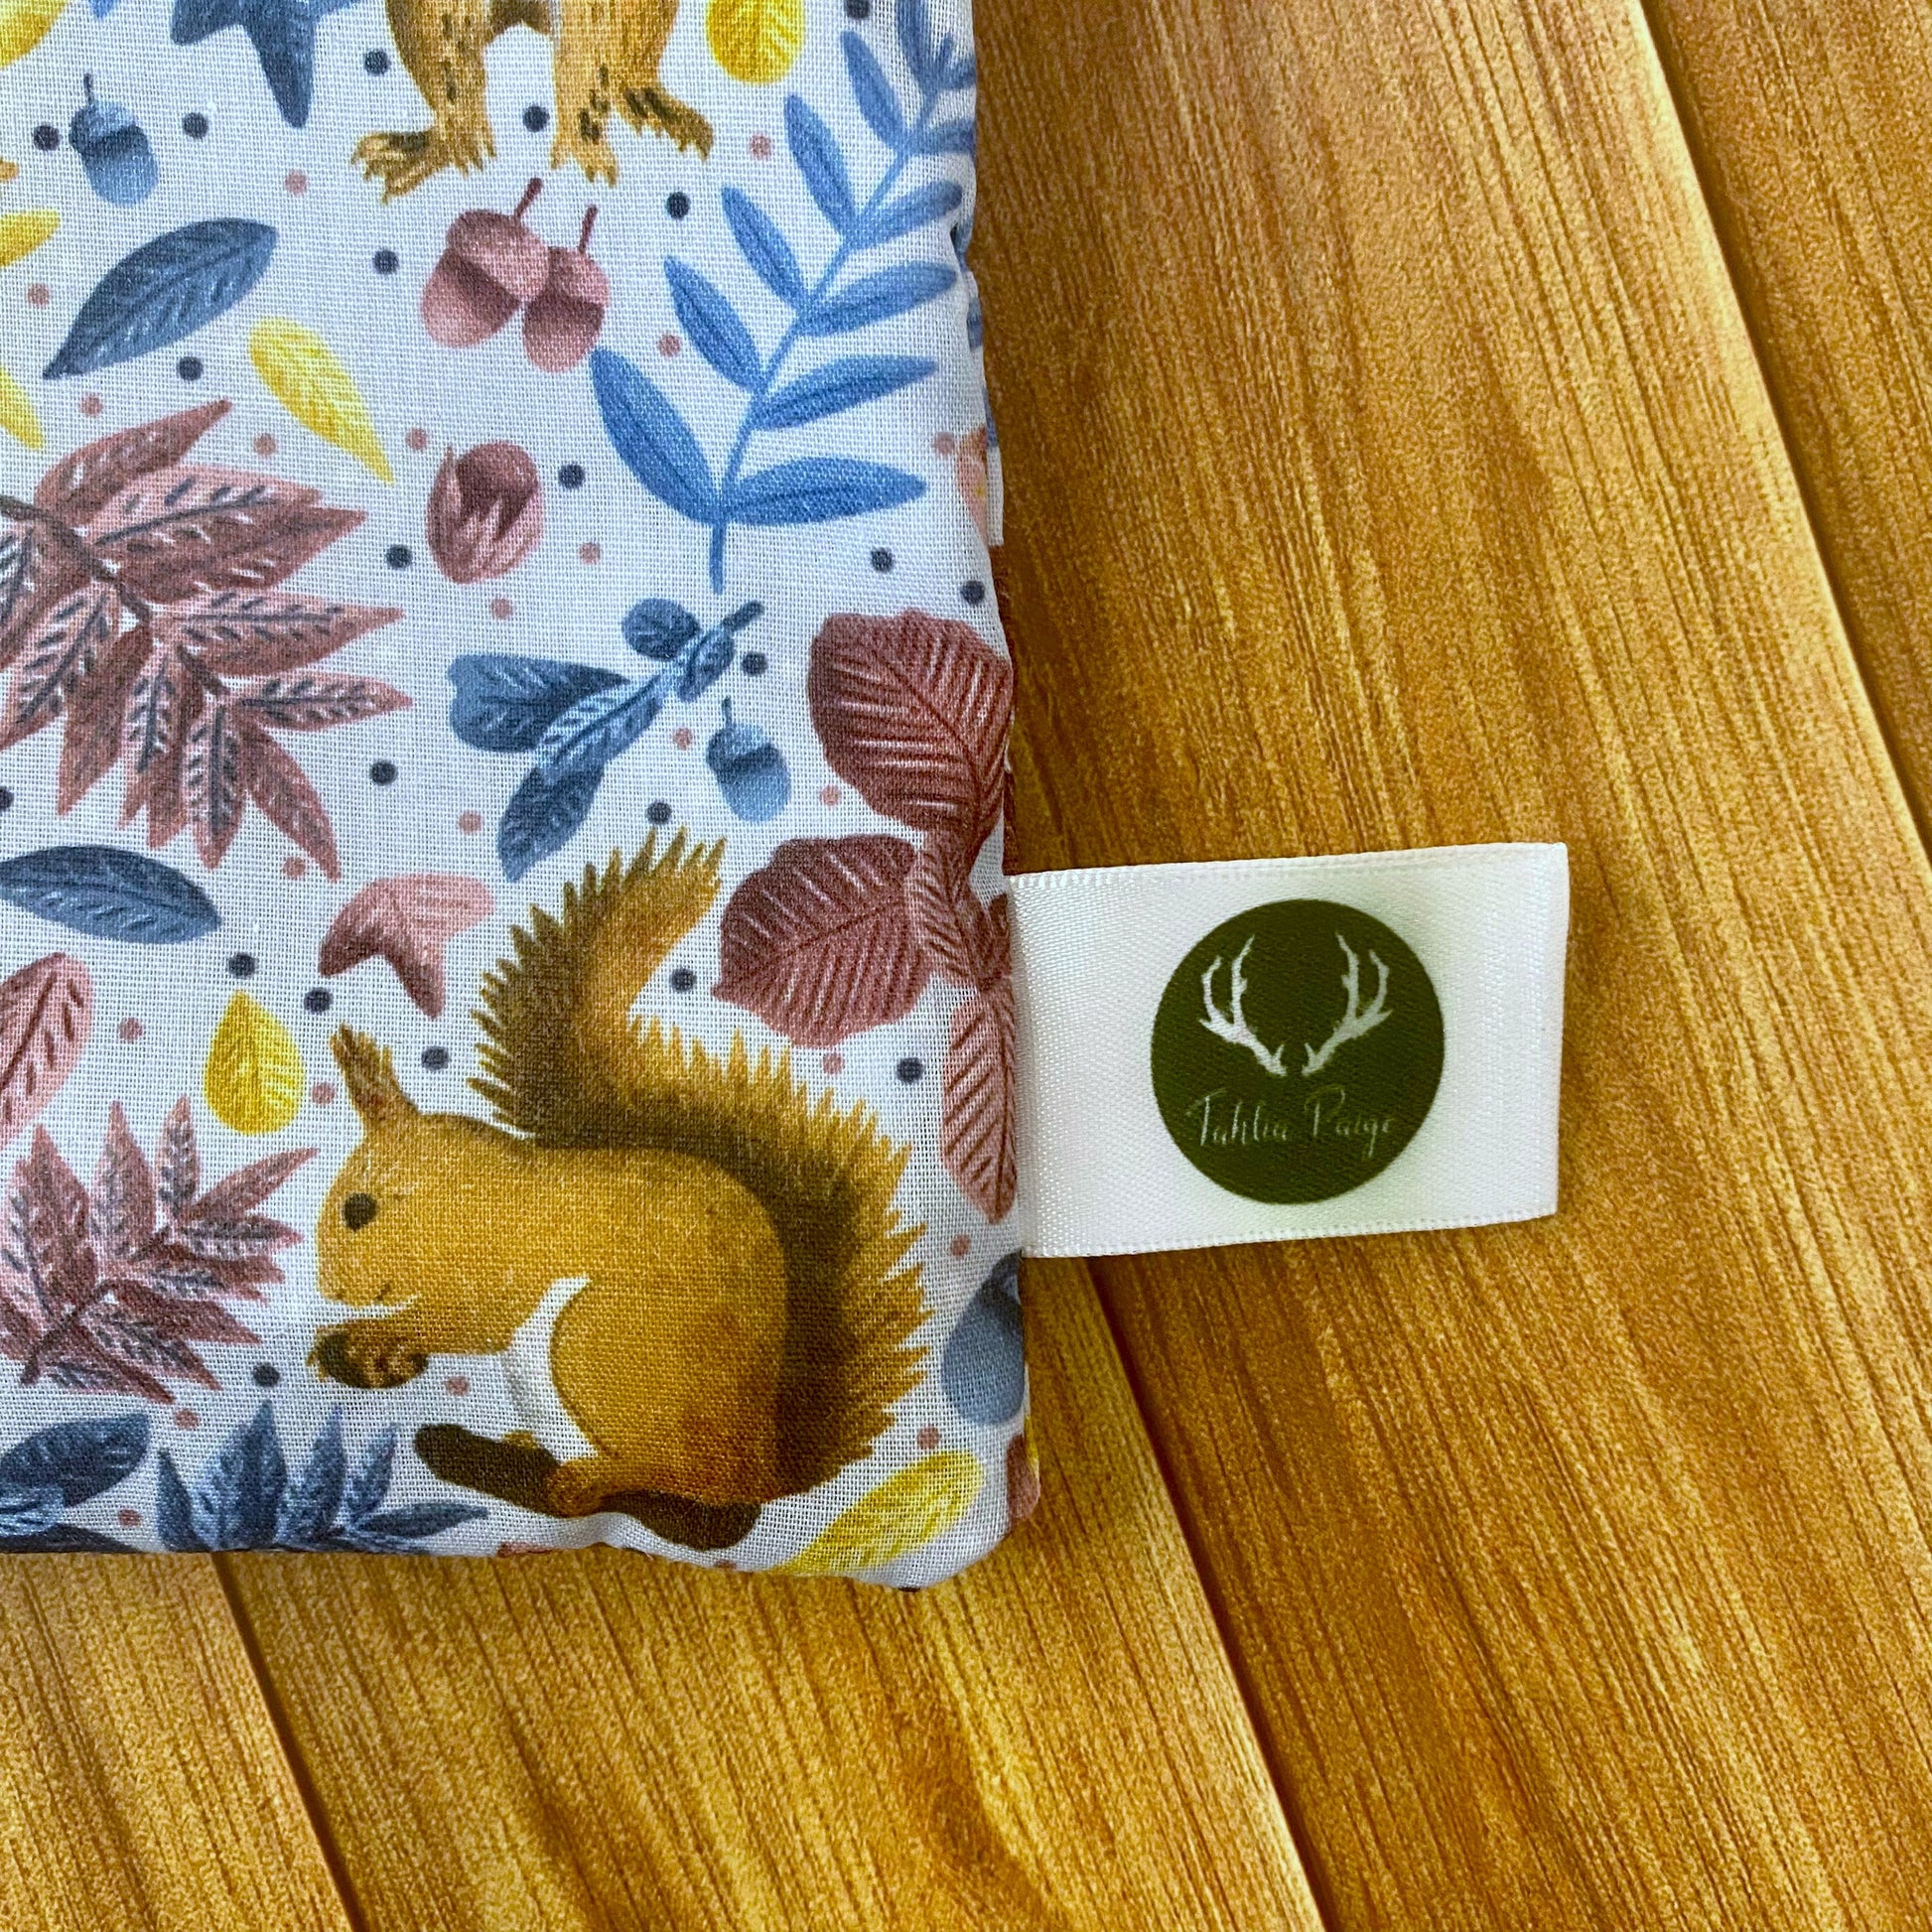 Closeup photograph of the corner of the red squirrel patterned pouch showing the Tahlia Paige label